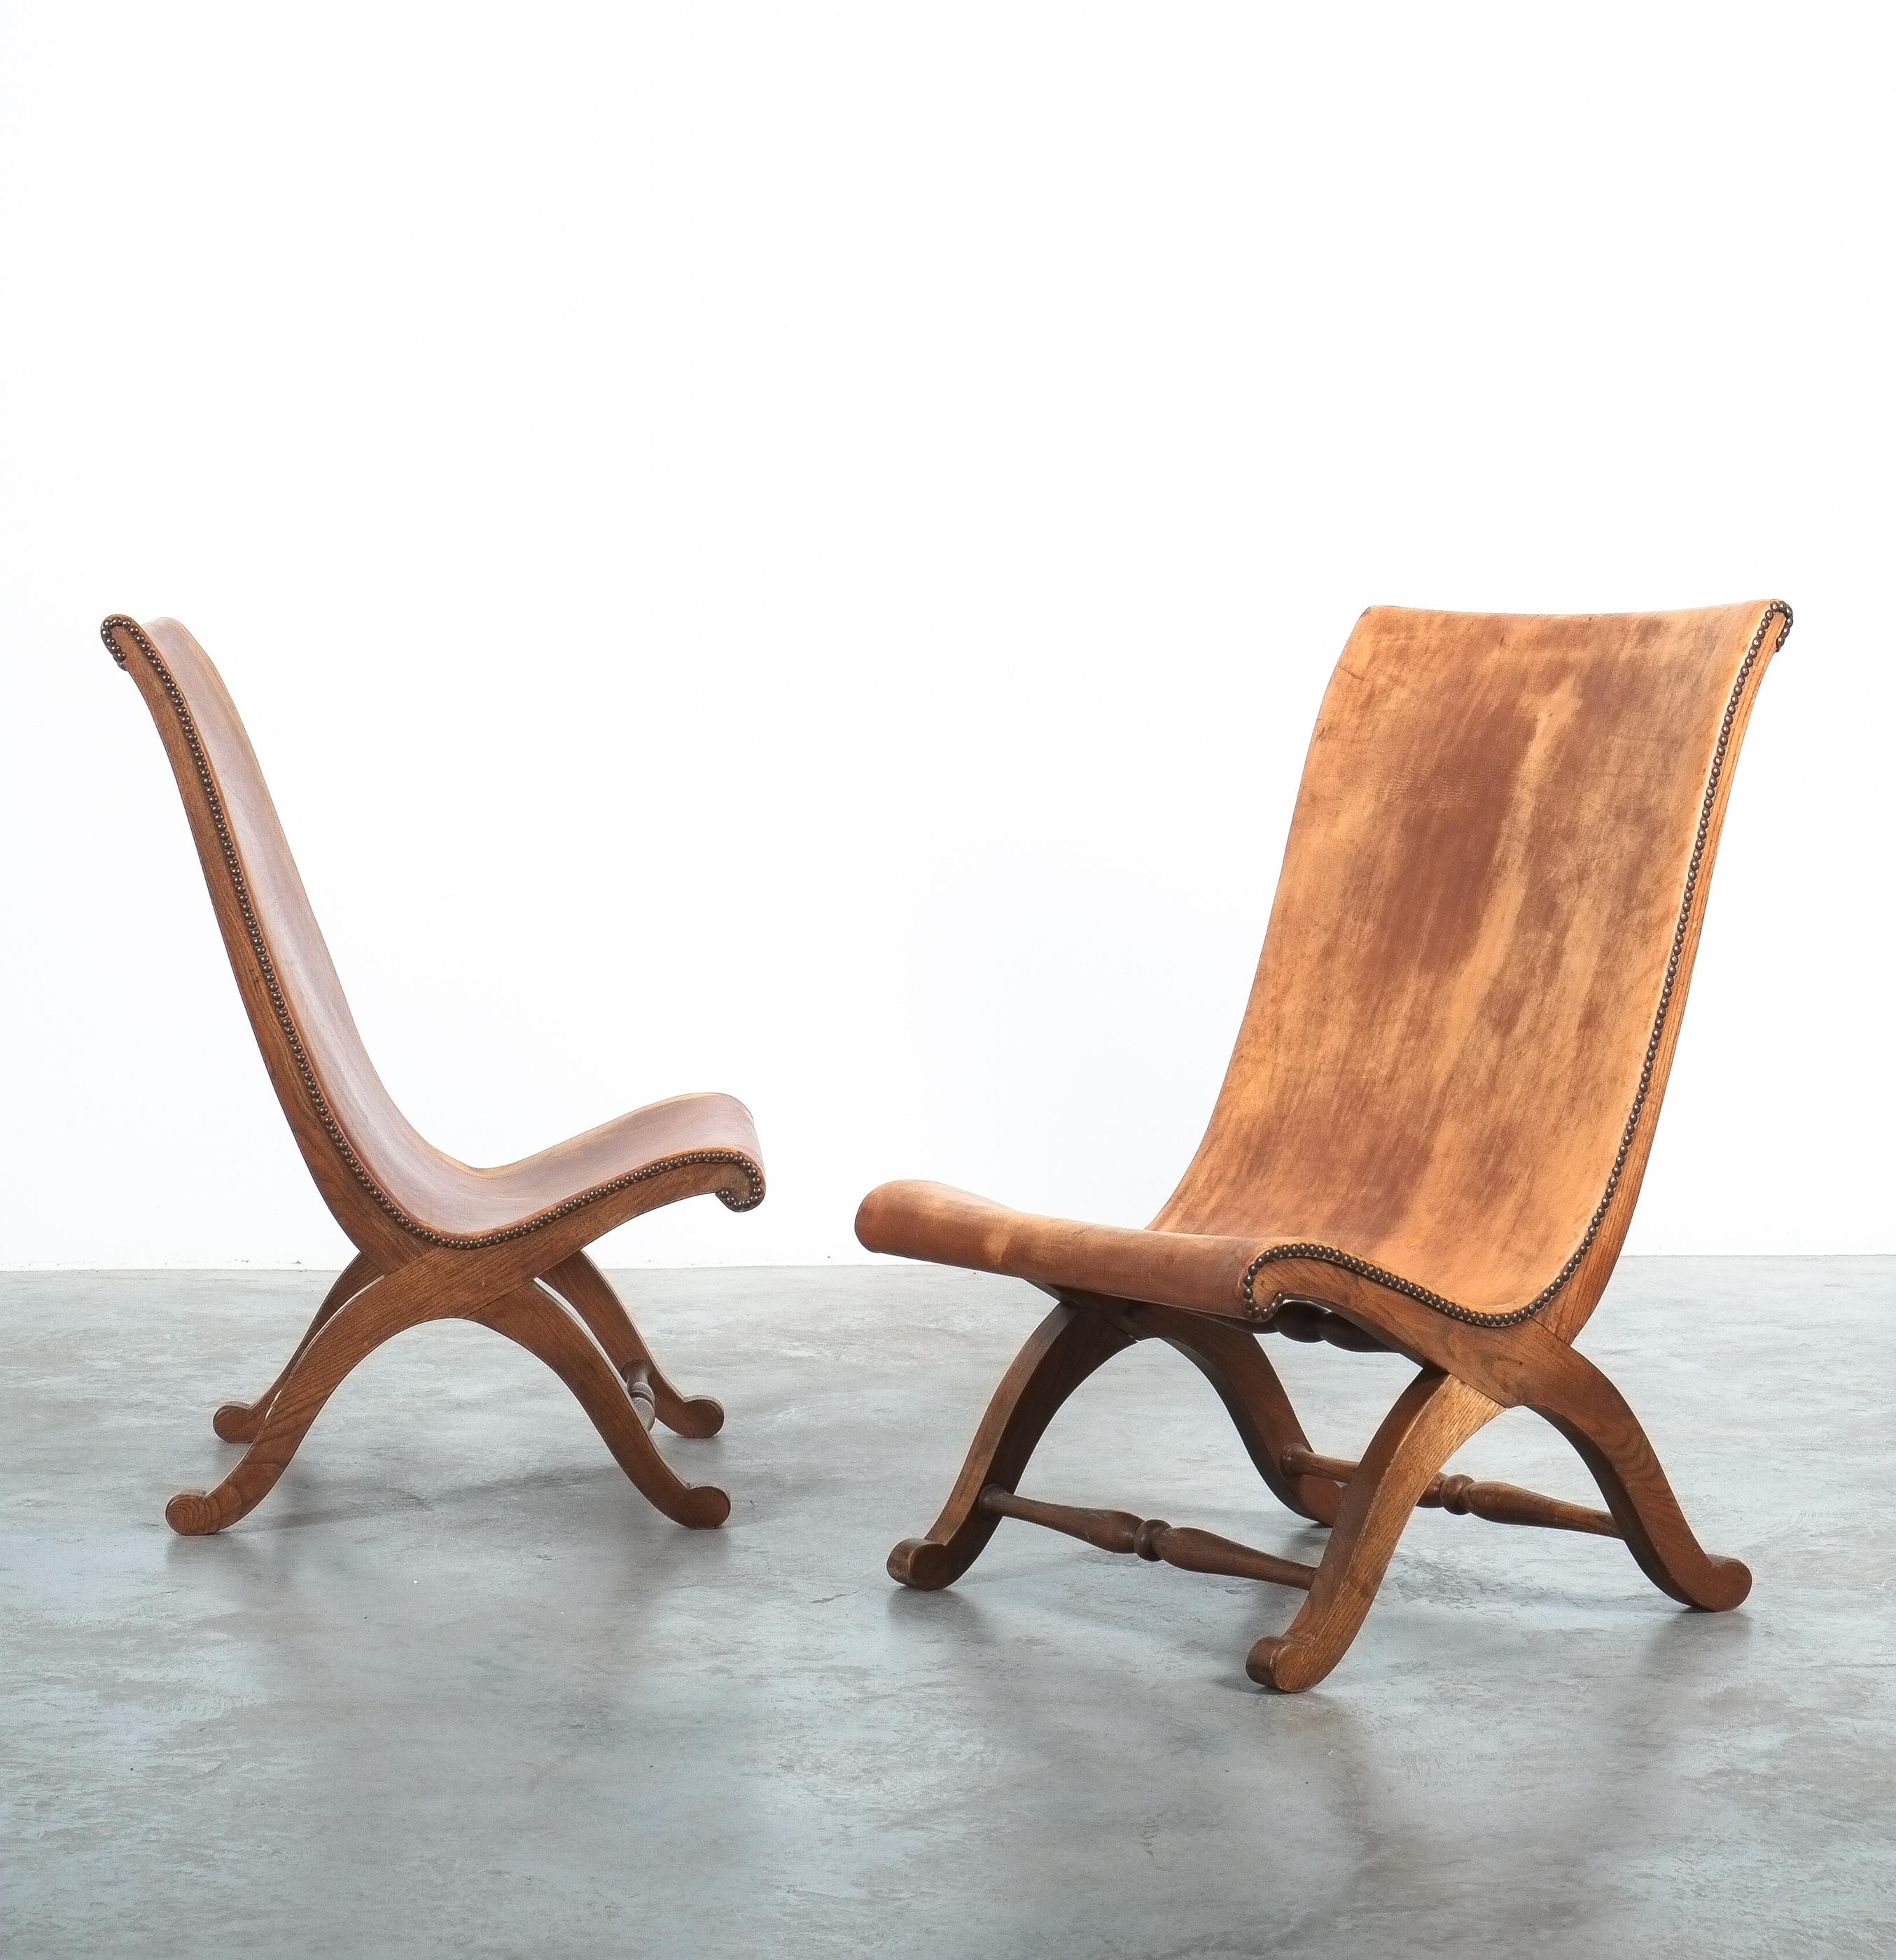 Original, labelled pair of Pierre Lottier chairs for Almazan, Spain Mid Century

Rare high-back version of a pair of cognac leather Butaque oak chairs in original great condition, bearing the makers mark, Valmazan, made in Spain. We admire the